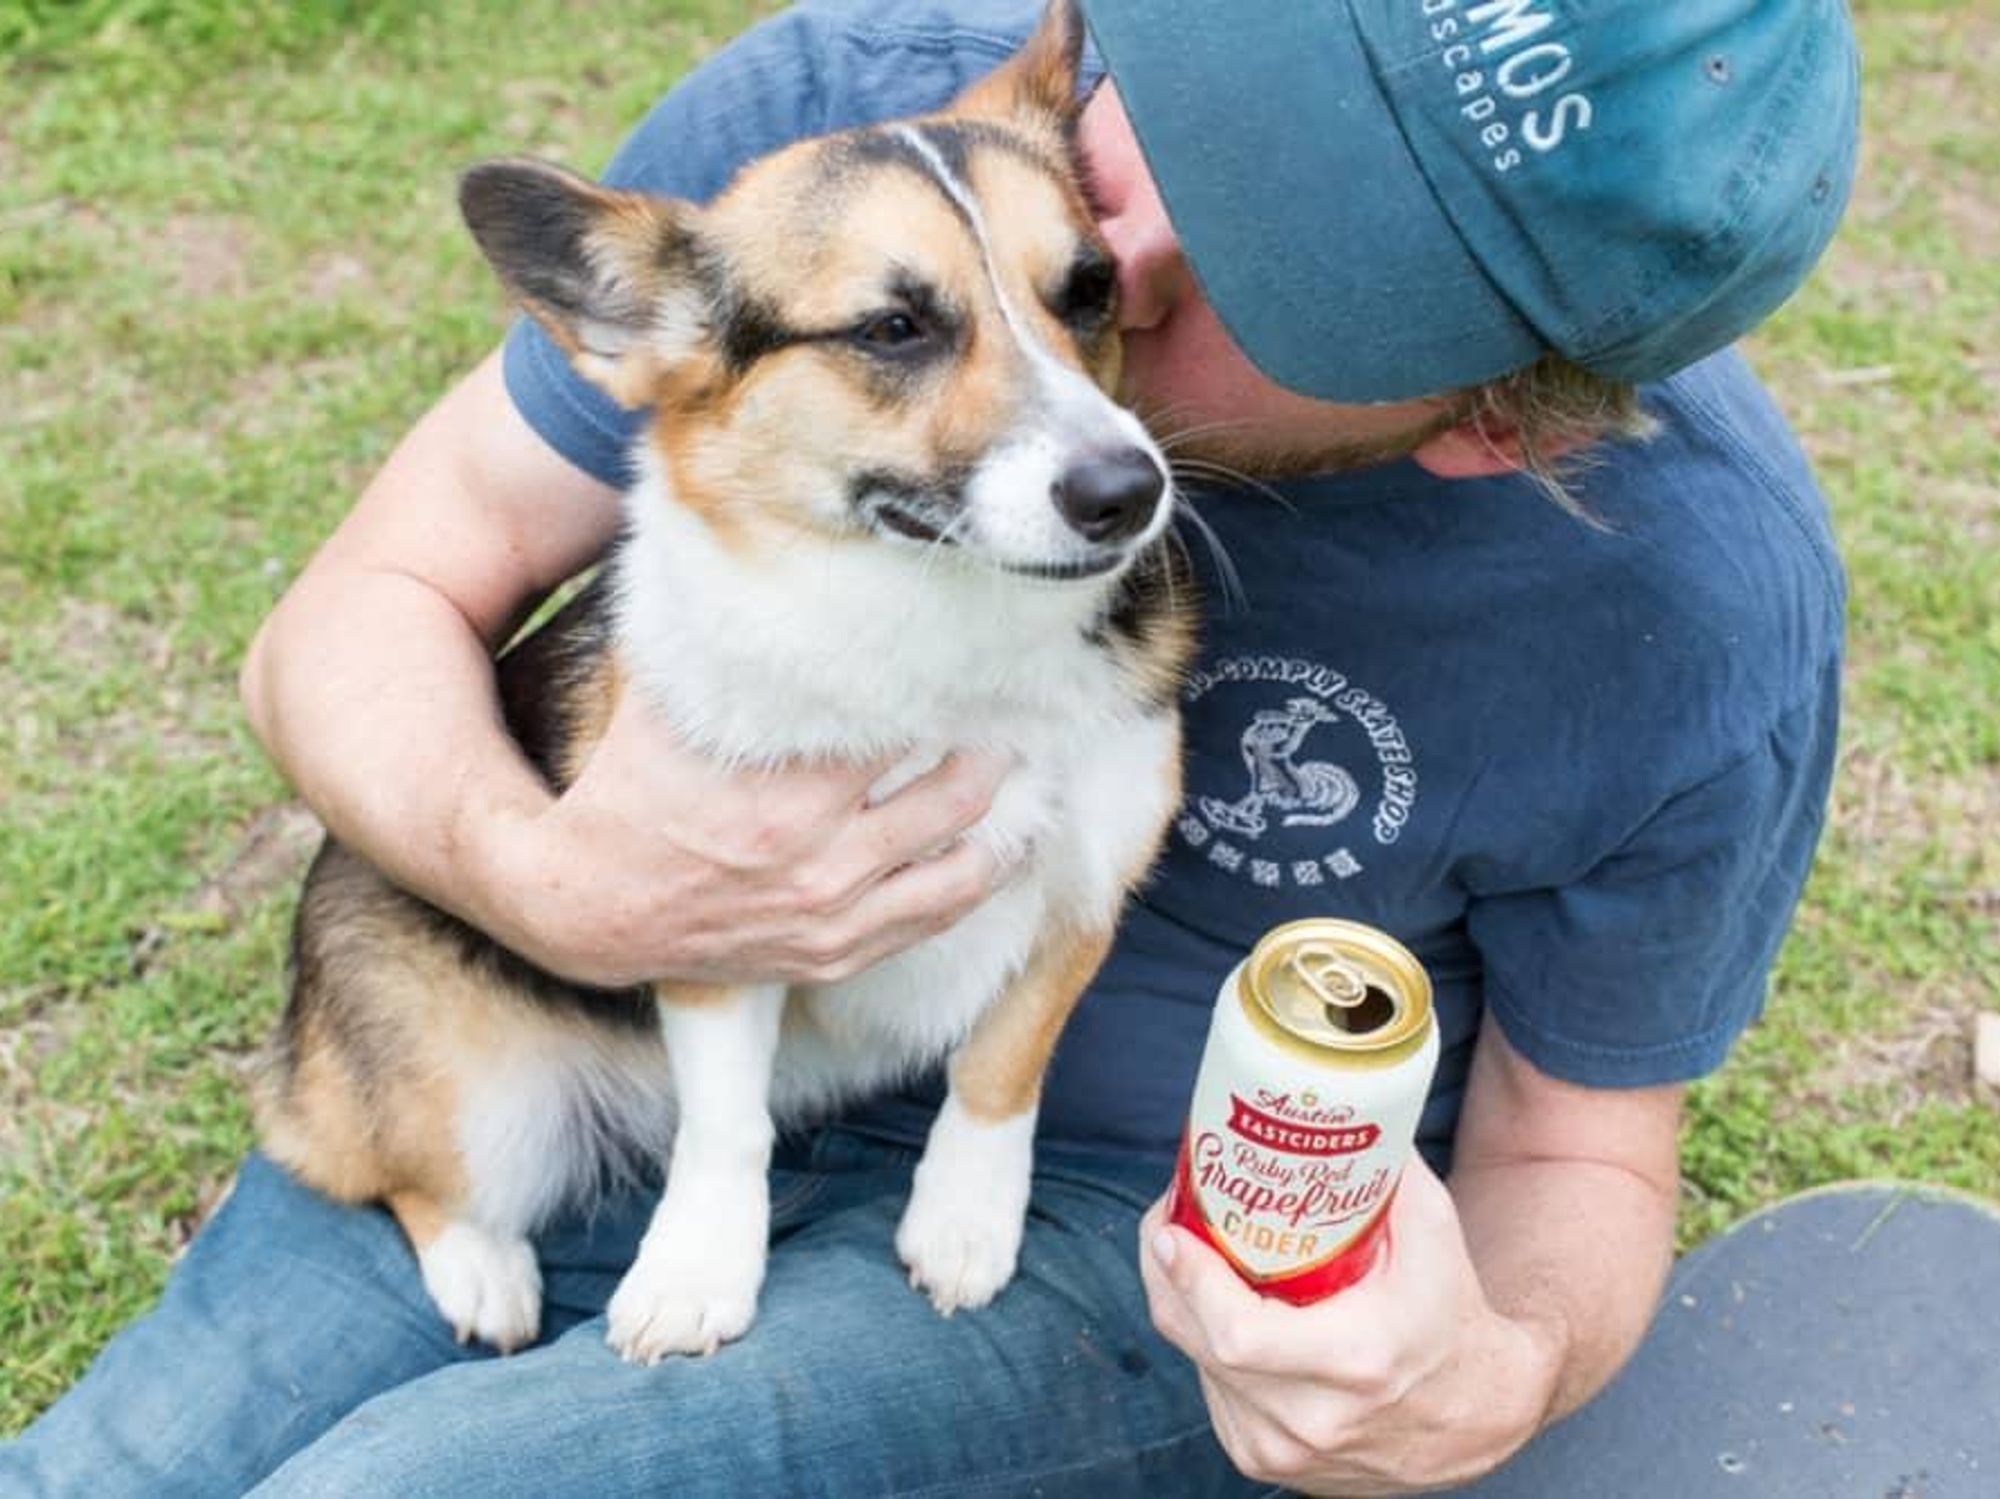 Man hugging dog while holding Austin Eastciders can